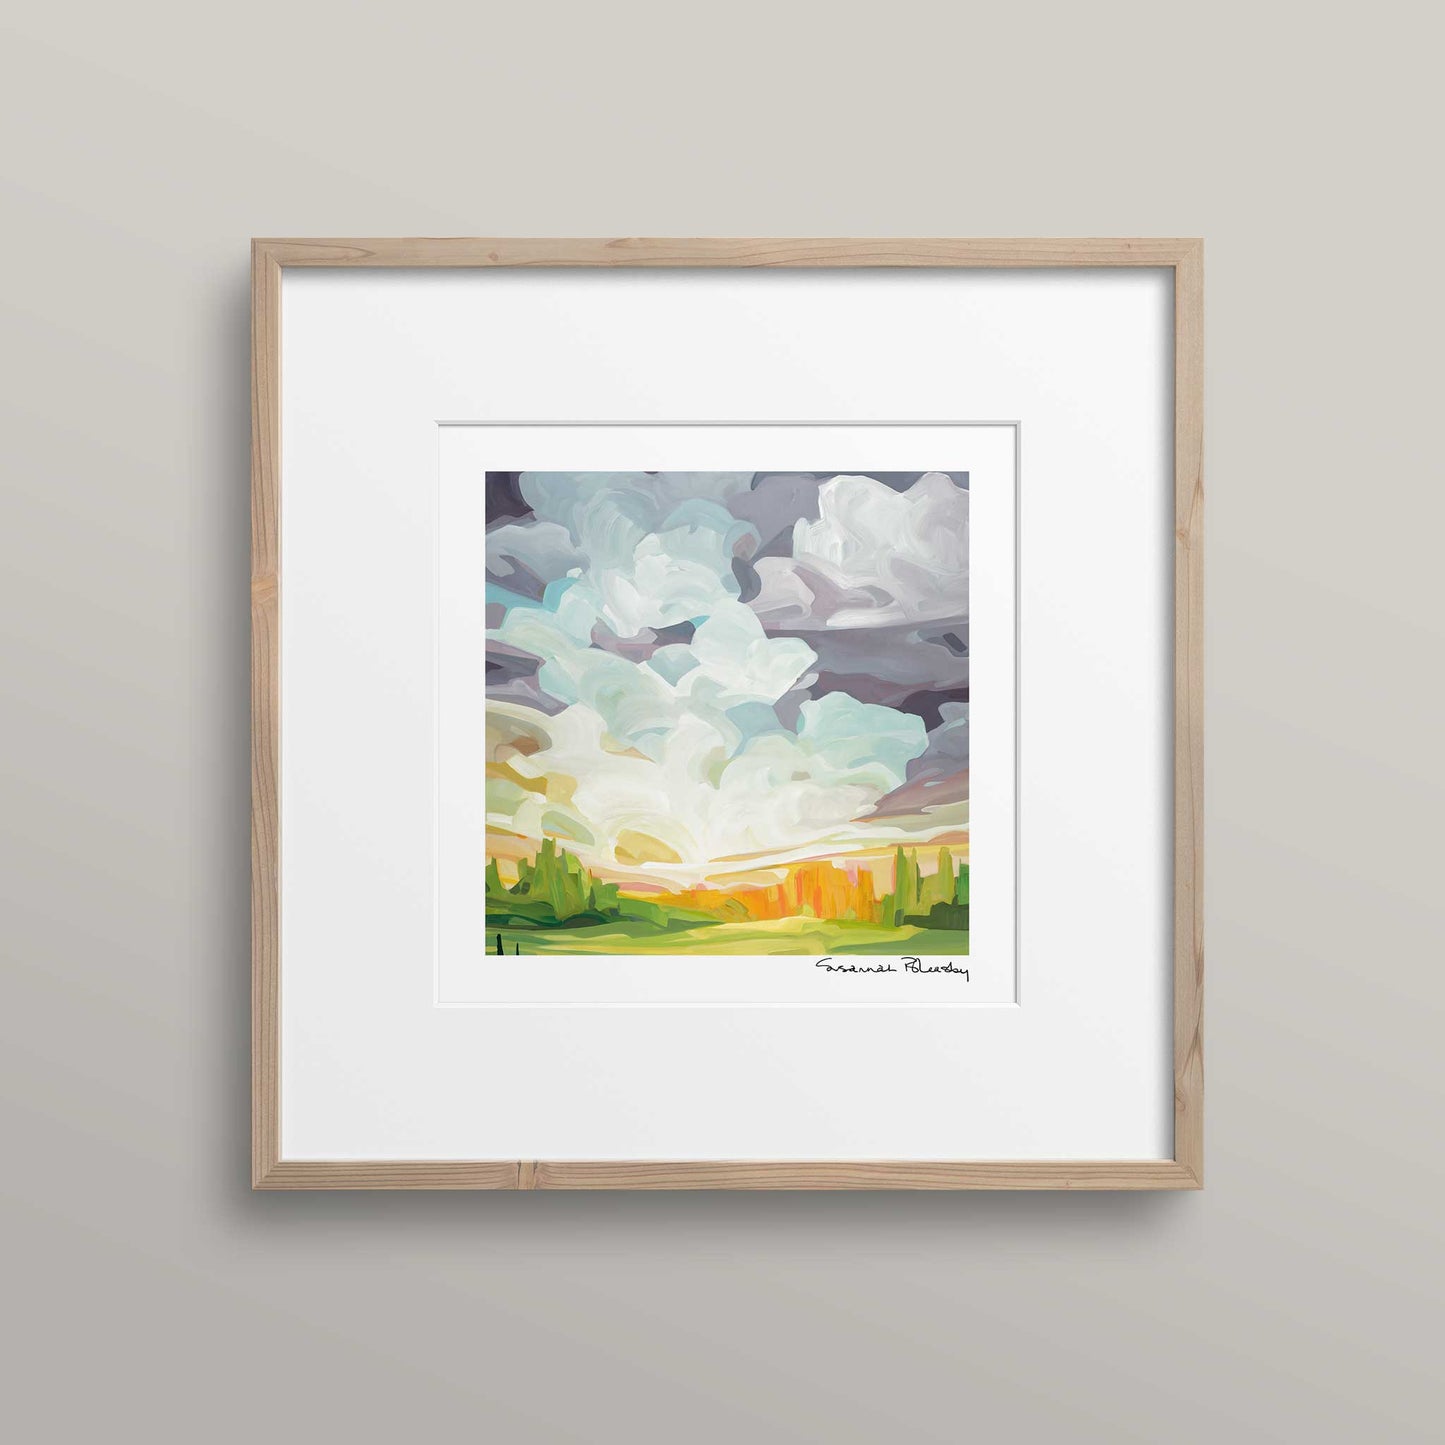 Square art print of a misty morning sunrise by Candian abstract artist Susannah Bleasby